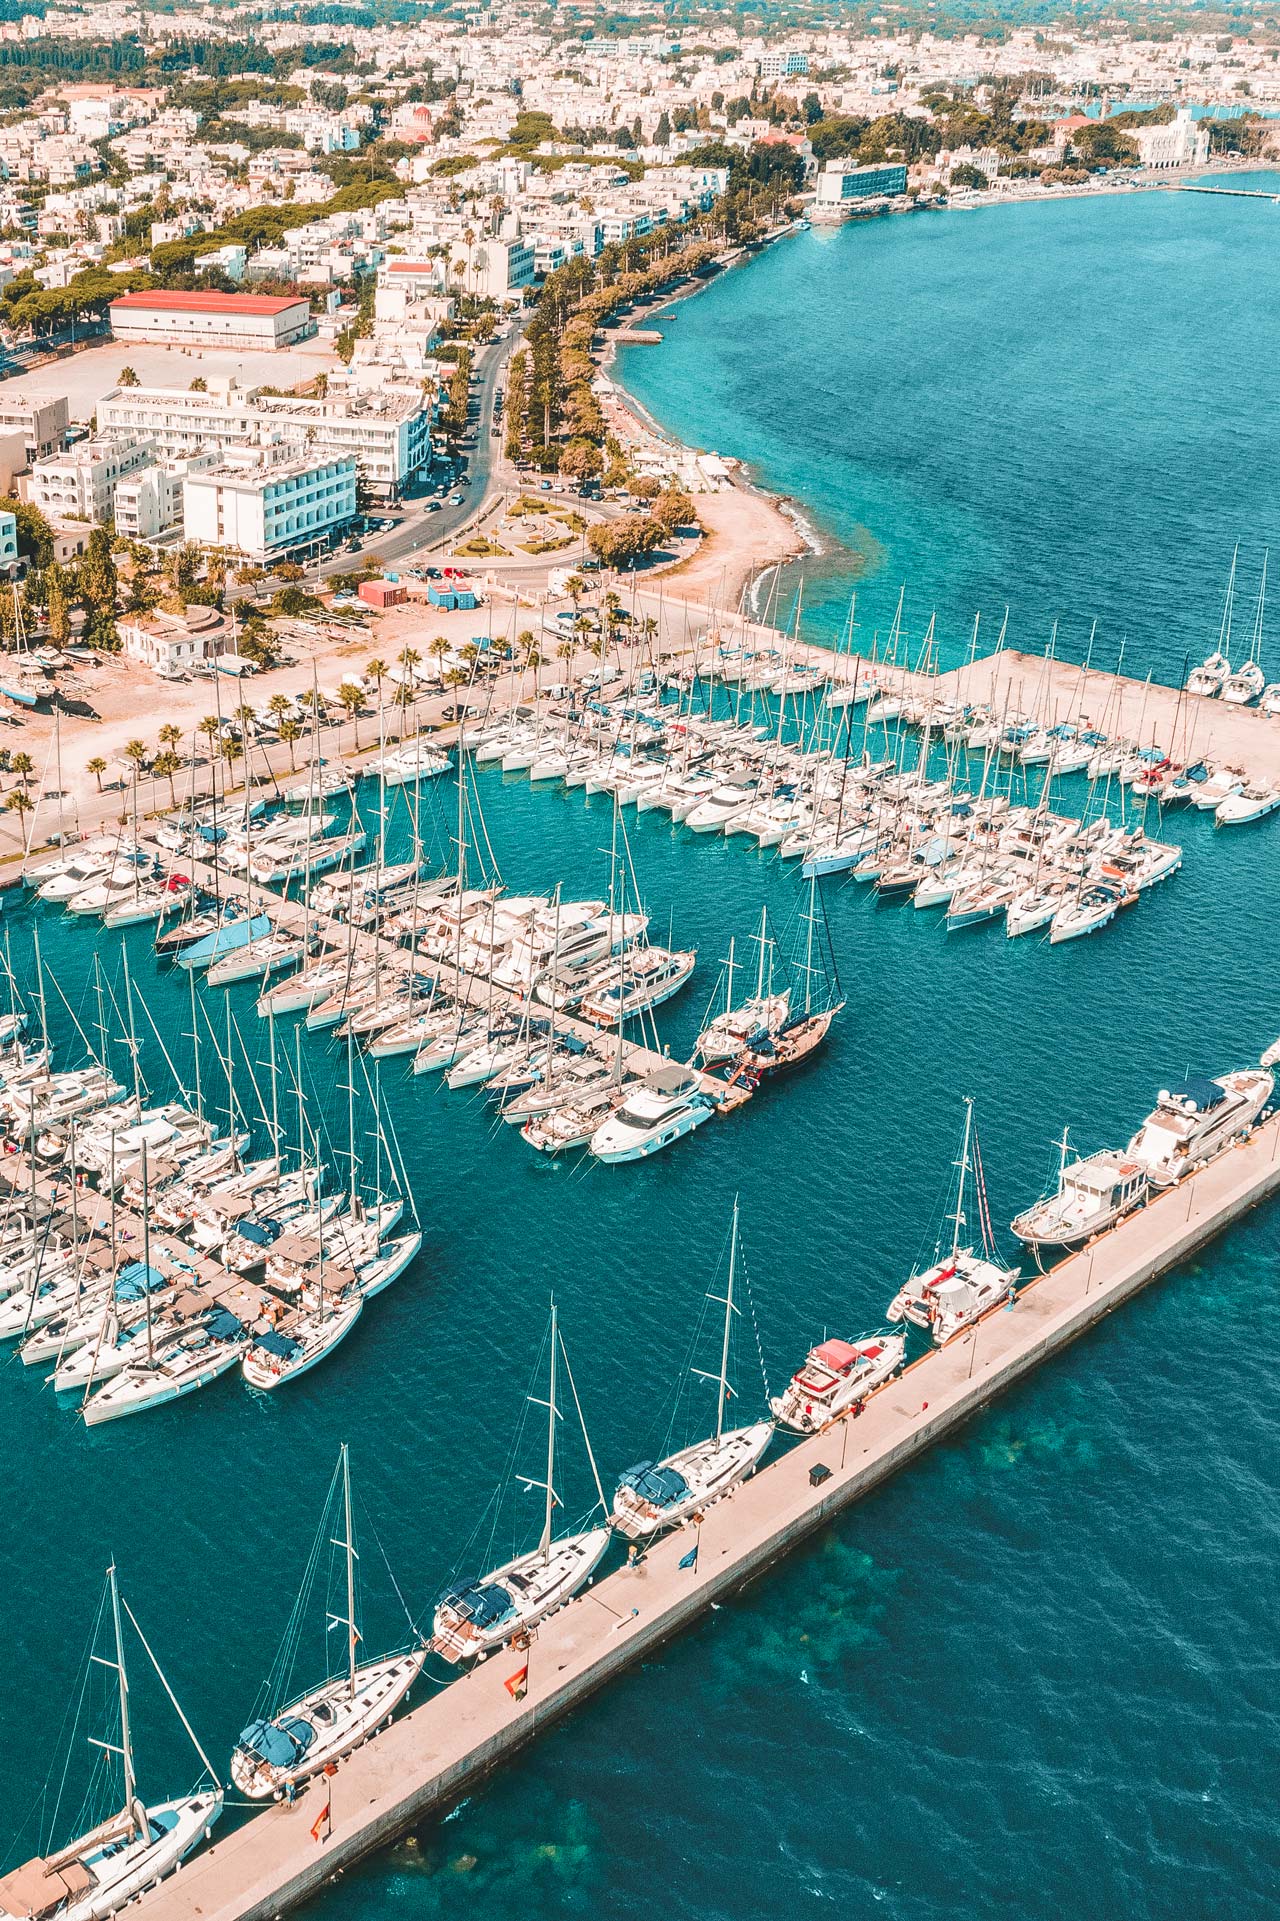 If you’re visiting Kos on a sailing boat, you can base yourself at the modern marina at the eastern edge of the town-its facilities are excellent